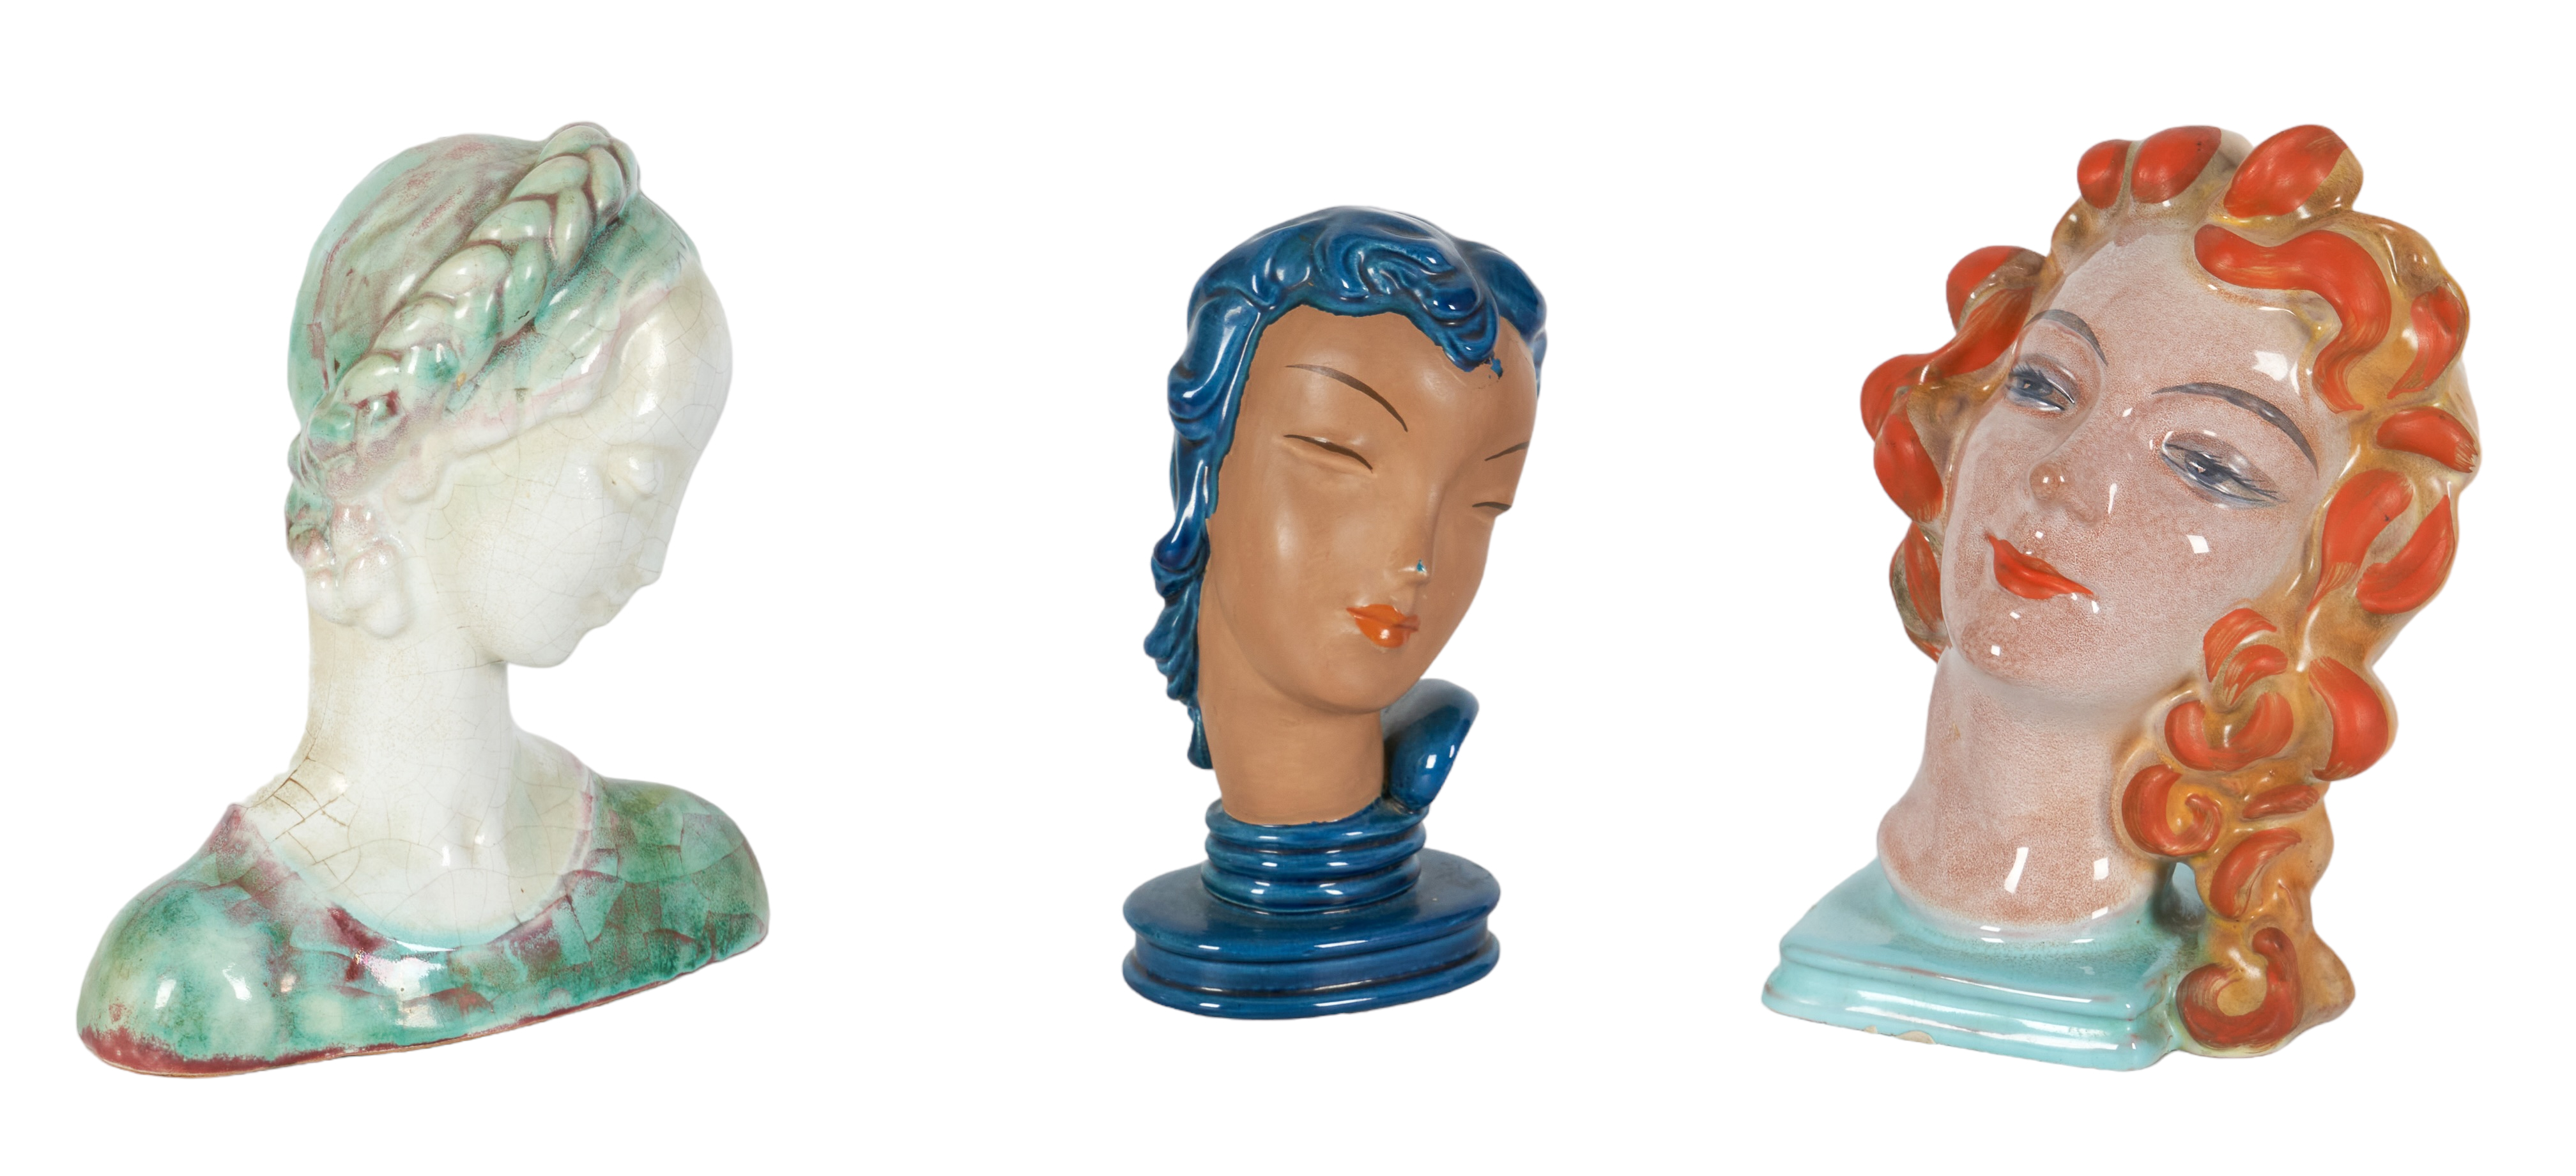  3 Pottery female busts to include 2e2490